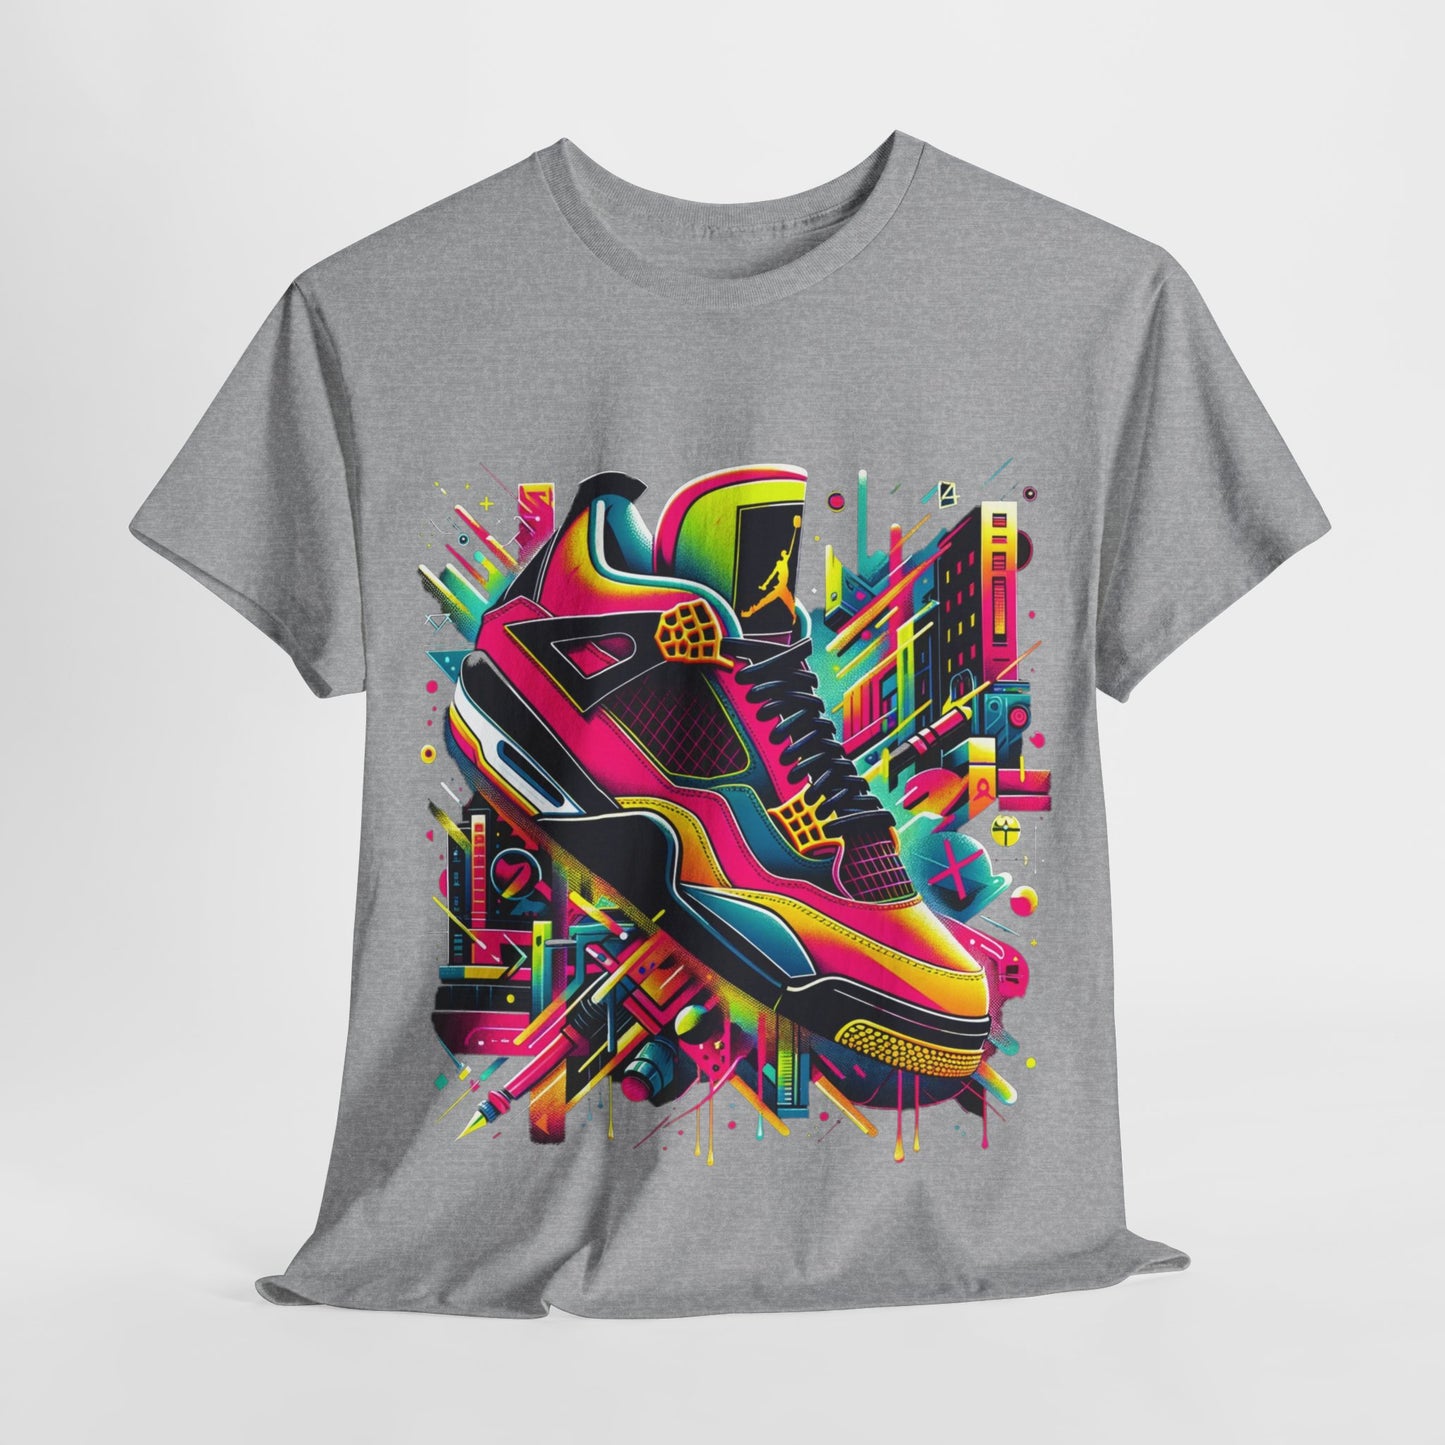 Y.M.L.Y. "Sneaker Culture" T-Shirt crafted with inspiration from the iconic Jordan 4 Retro Toro Bravo sneakers.